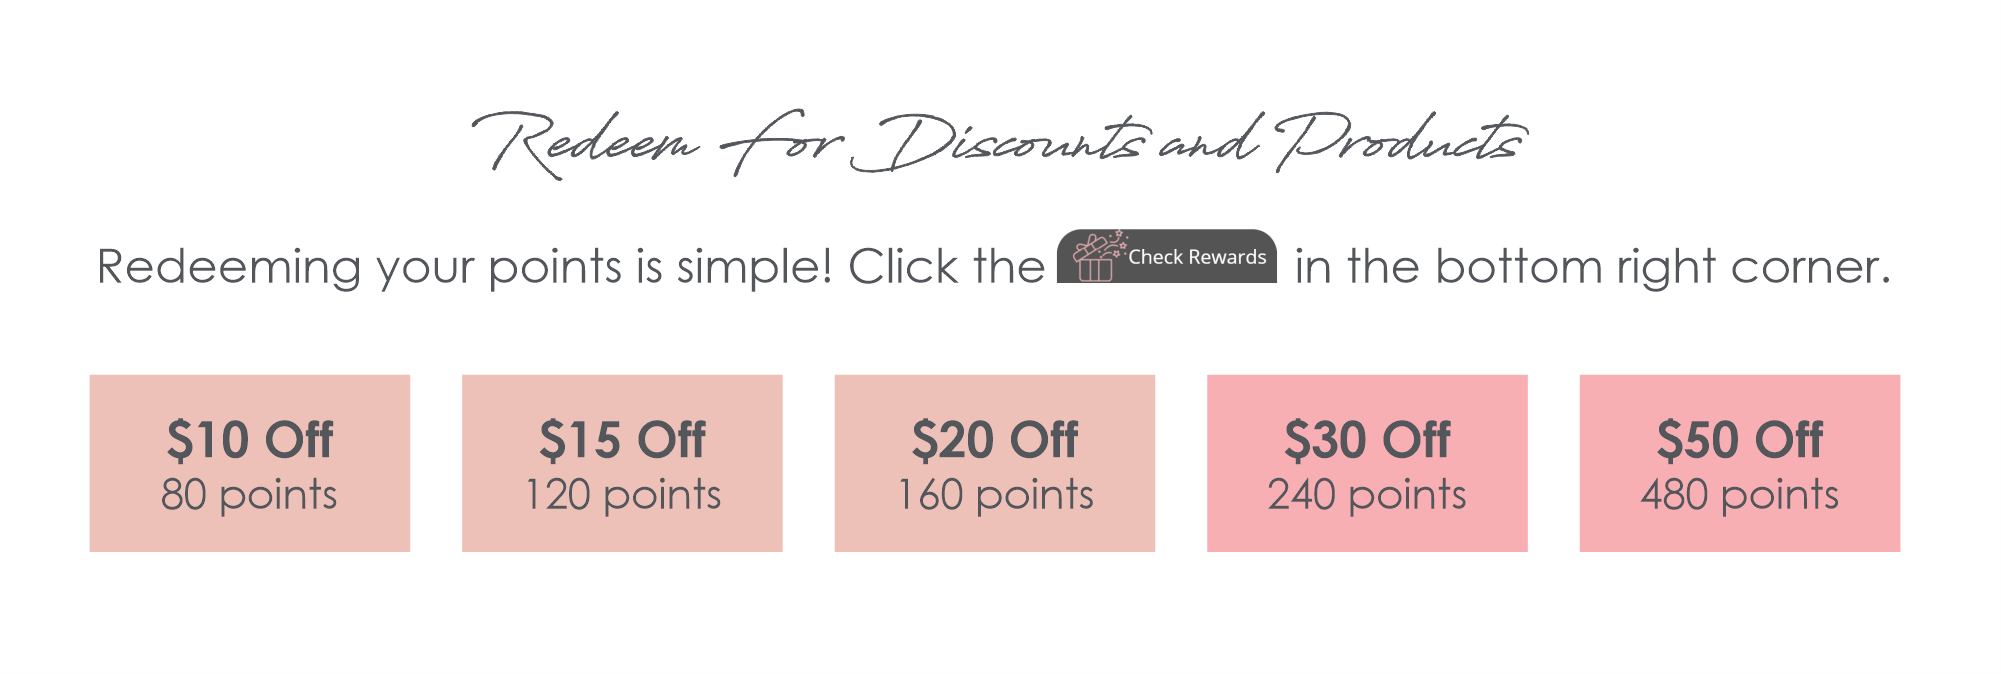 Current Point Rewards: 80 Points=$10 OFF, 120 Points=$15 OFF, 160 Points=$20 OFF, 240 Points=$30 OFF and 480 Points=$50 OFF